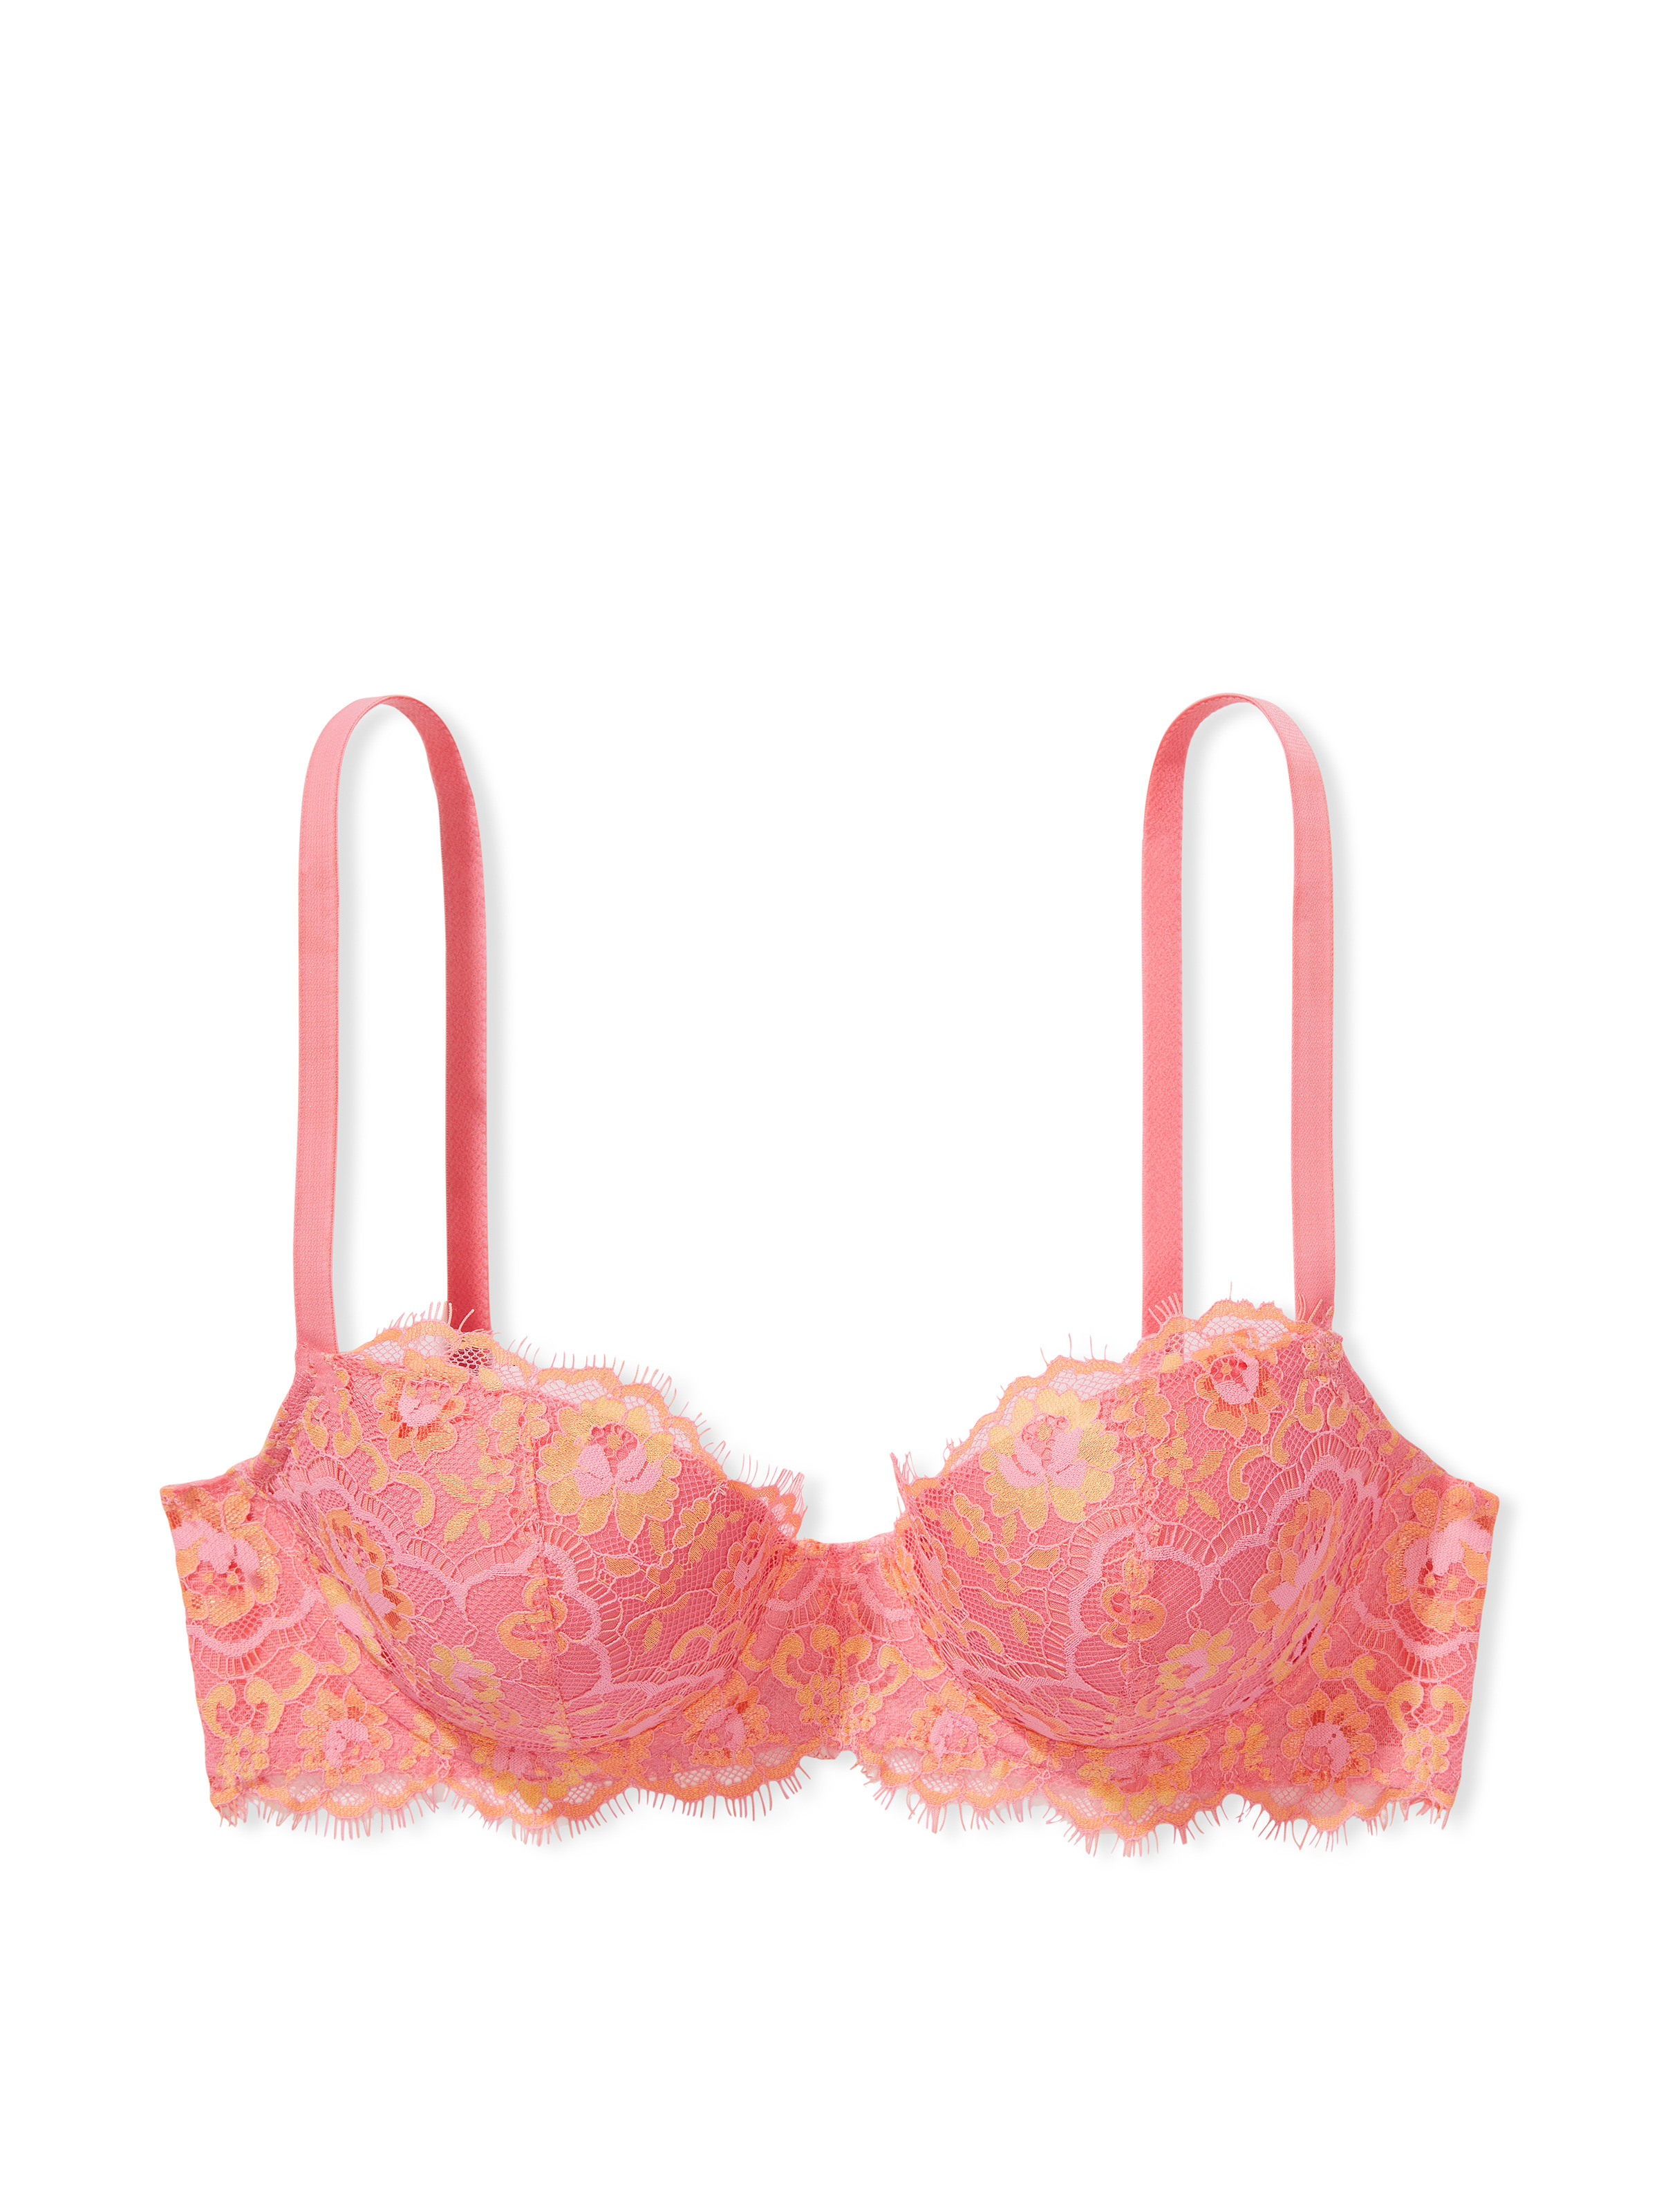 Victoria's Secret Victoria Secret Dream Angels lined Demi bra Size  undefined - $22 - From Stephanie